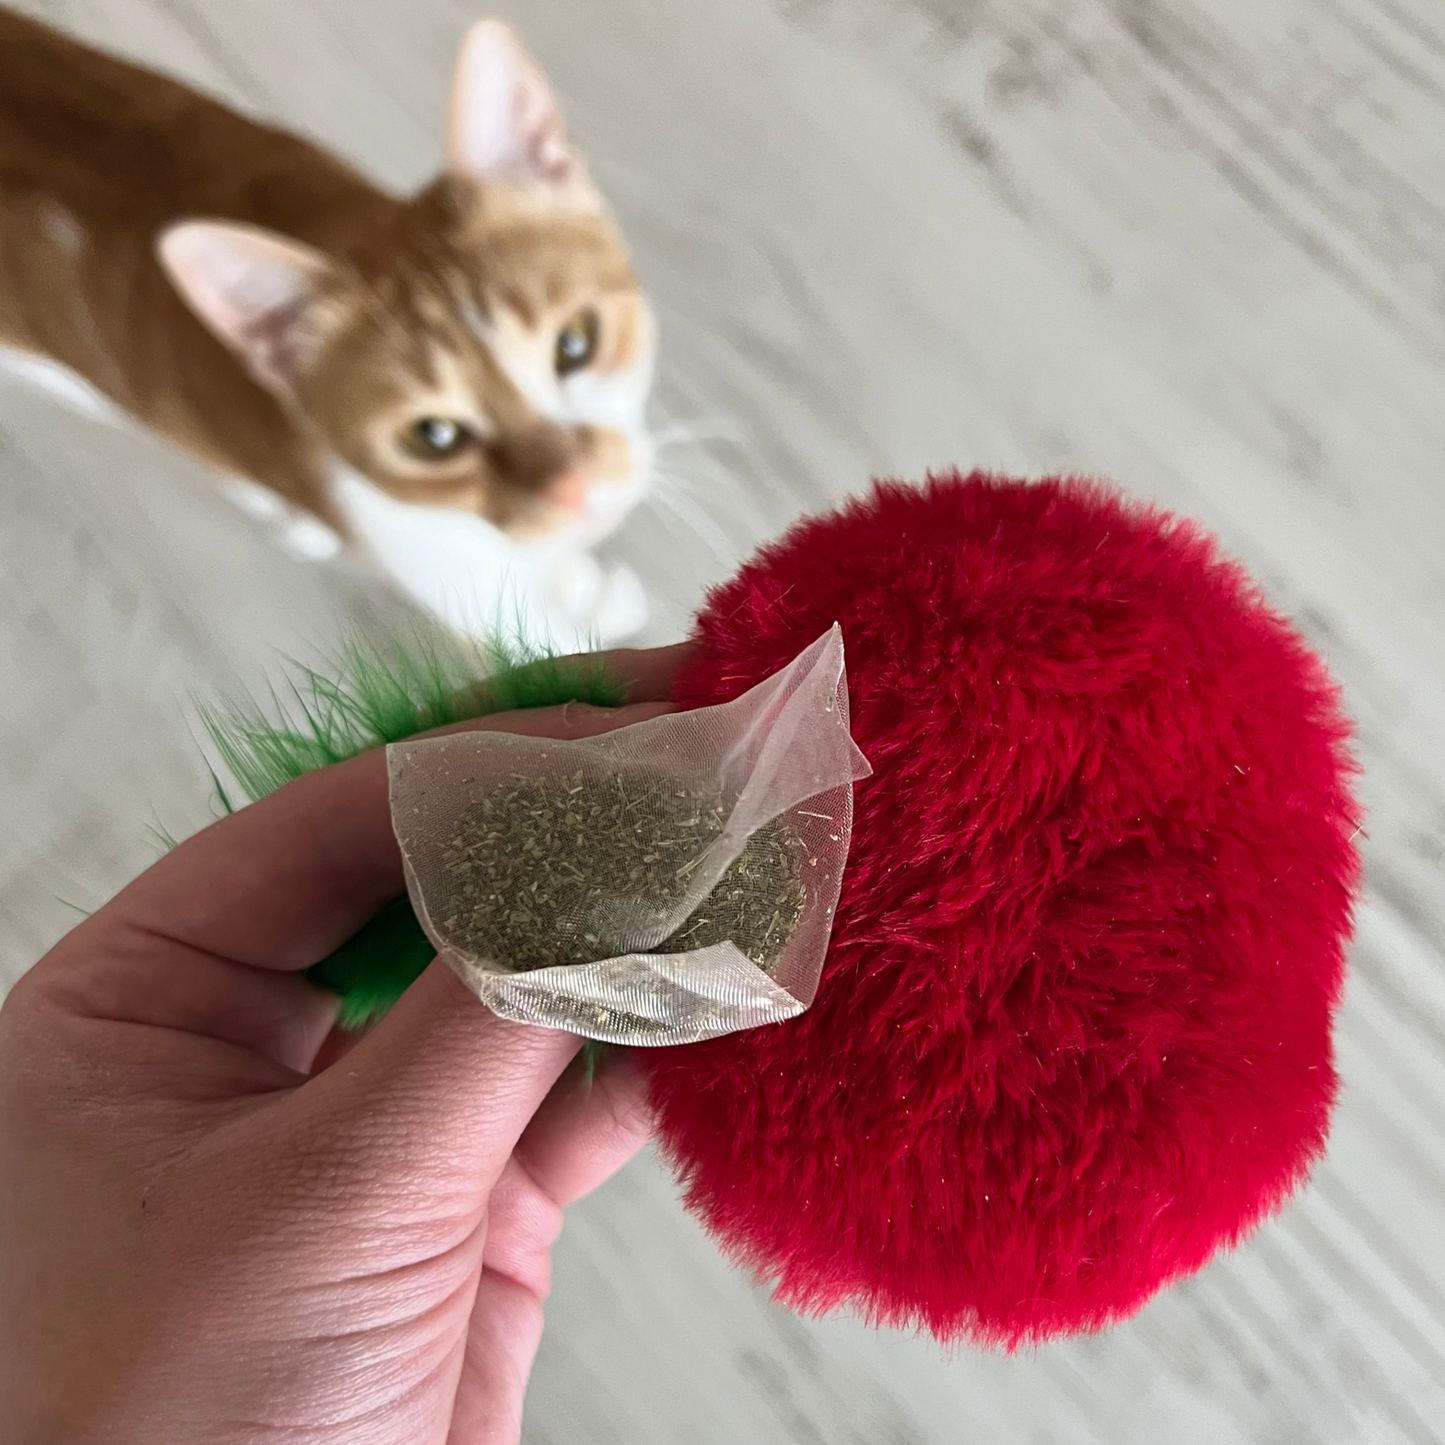 MyMeow Krazy Apple Refillable Cat Toy with 10 North American Natural Catnip Refill Bags